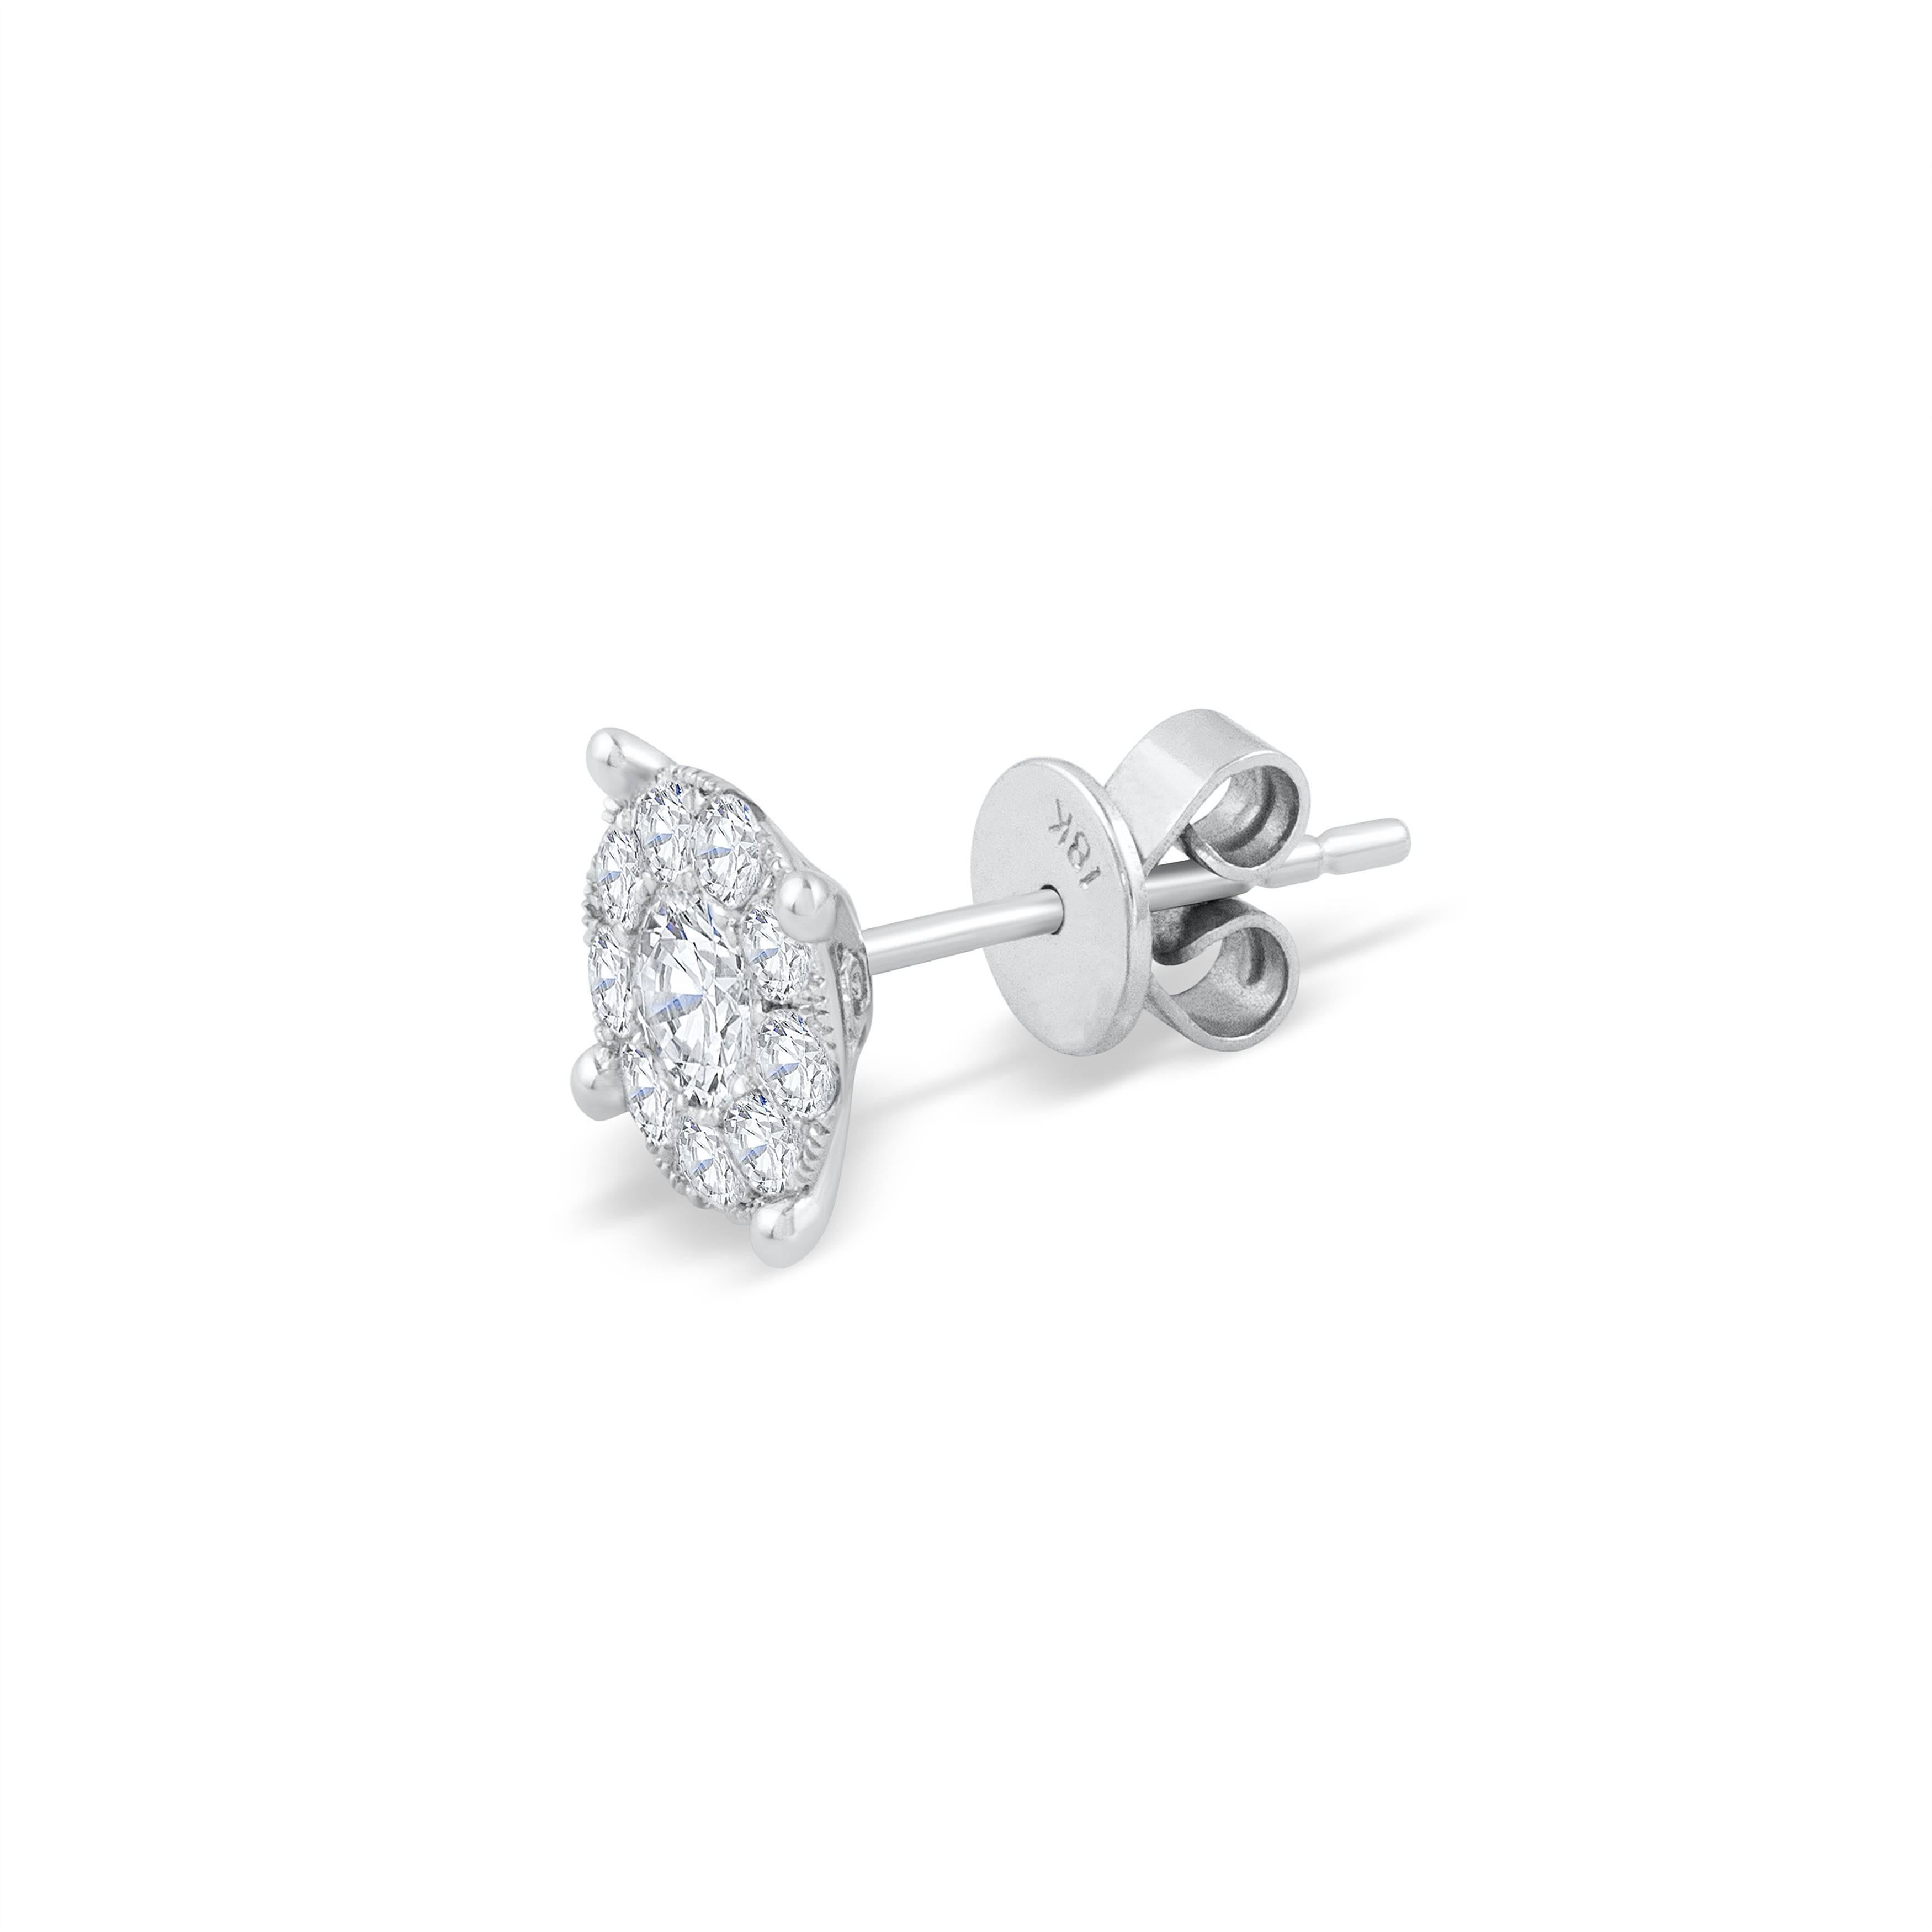 A versatile piece to add sparkle to any outfit. These stud earrings feature a cluster of brilliant round diamonds set in 18k white gold. Weight of the diamonds is 1.29 carats total. 

Style available in different price ranges. Prices are based on